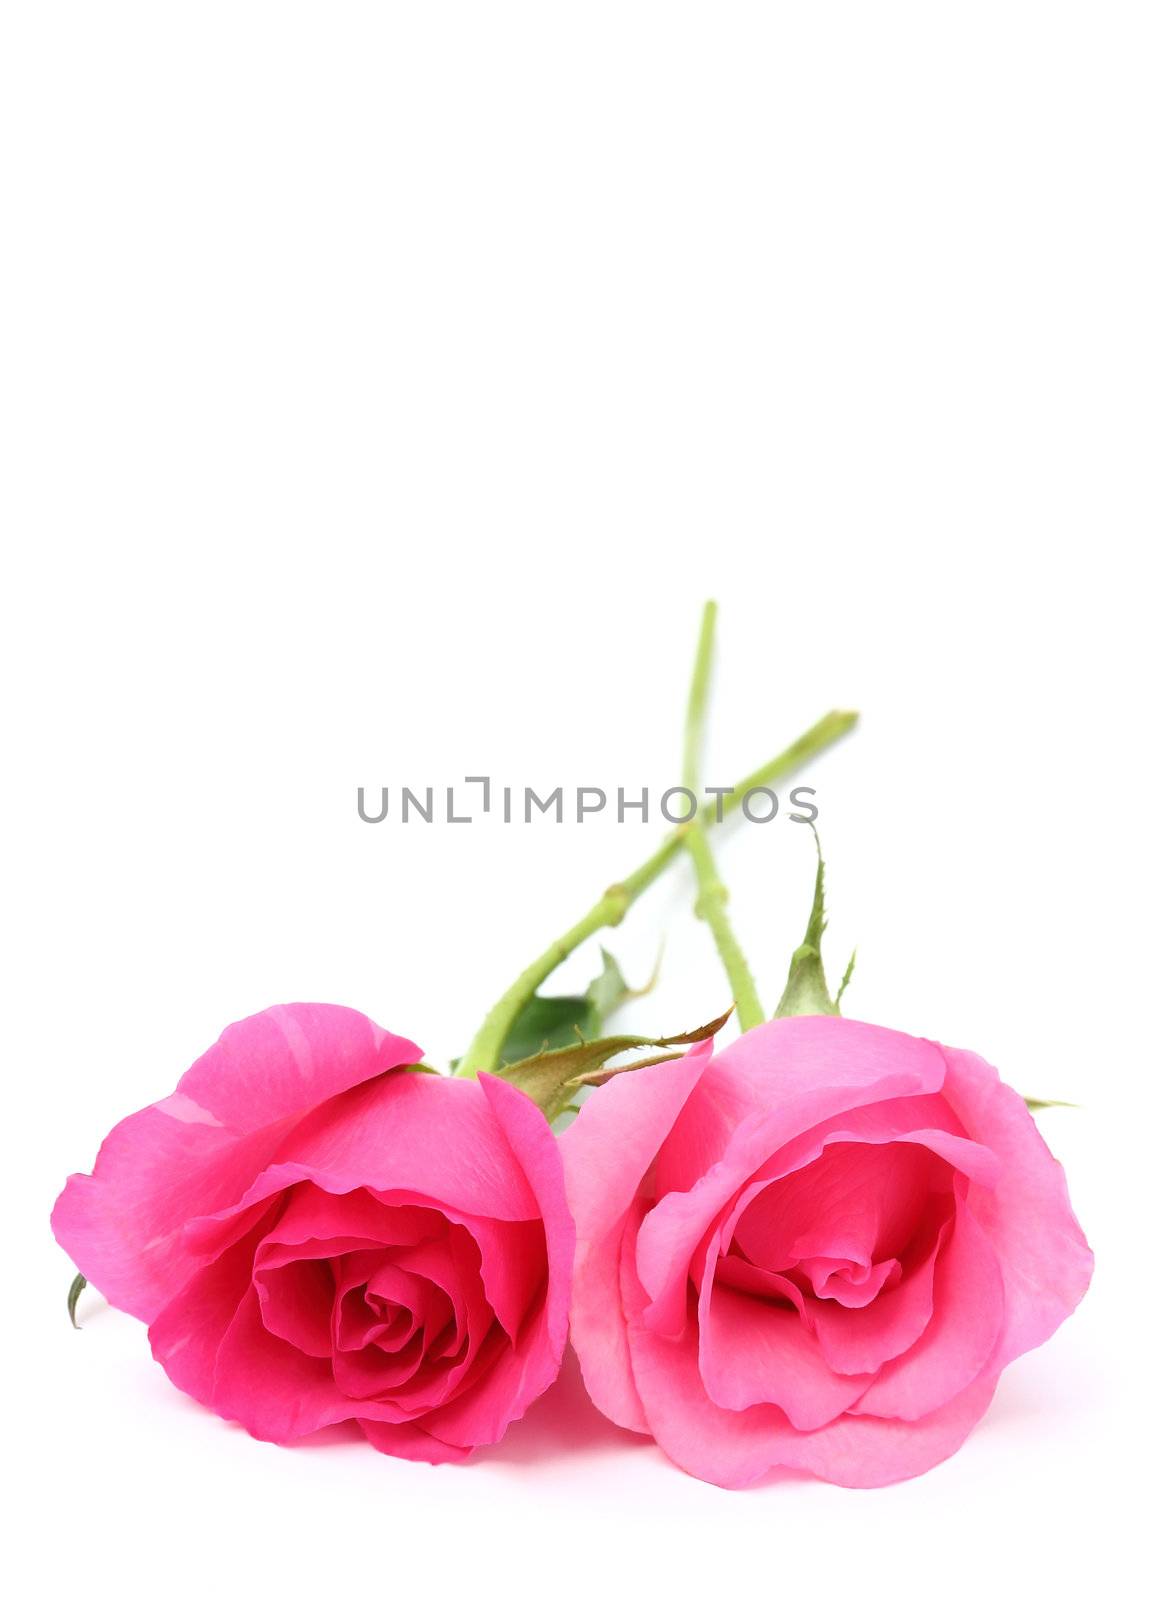 Two pink roses on white background with space for text by molly70photo